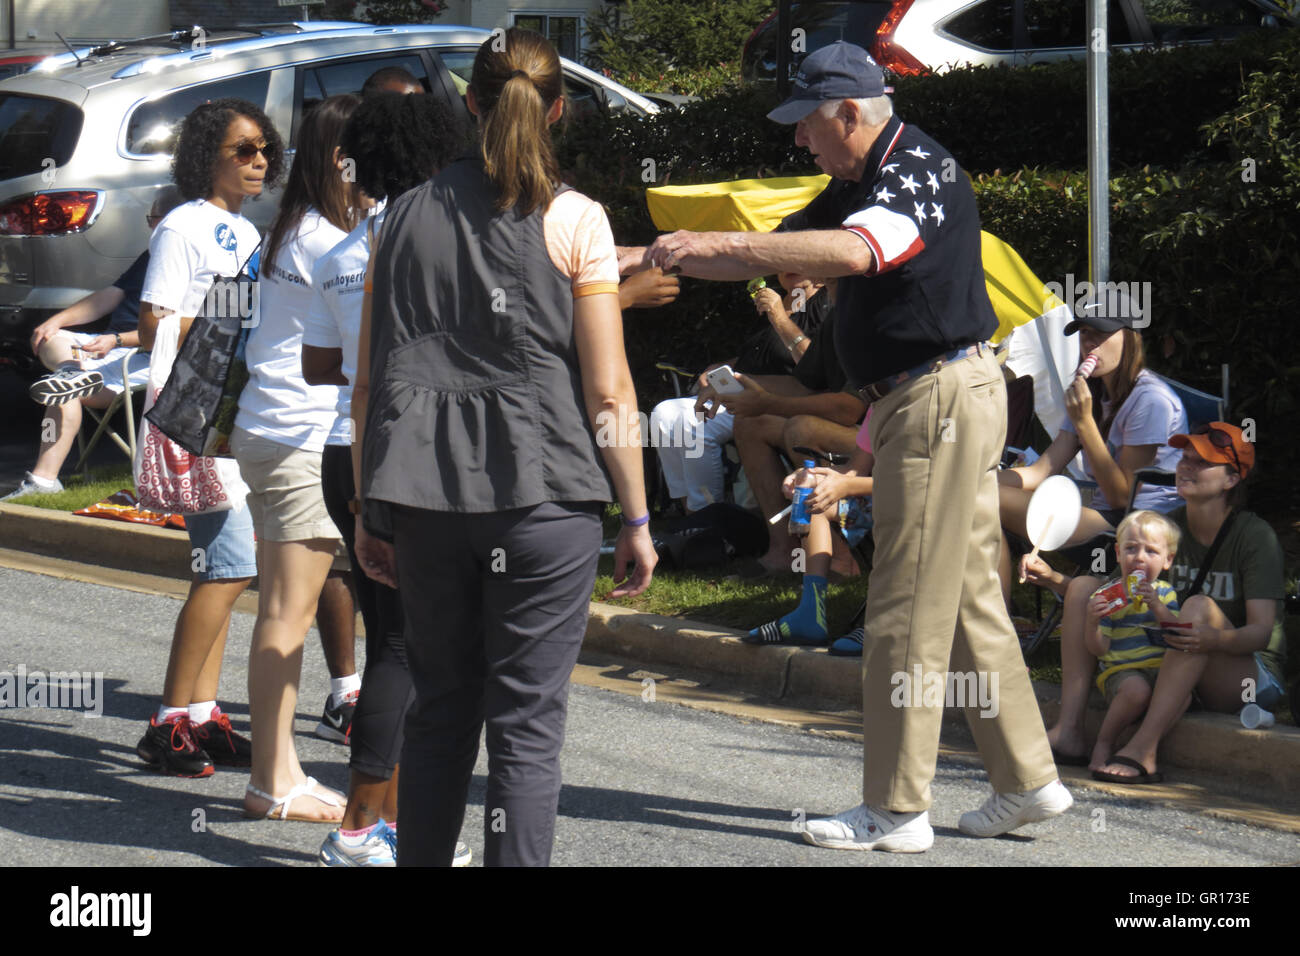 Greenbelt, Maryland, USA. 5th Sep, 2016. Steny Hoyer, United States Representative for Maryland's 5th congressional district, seen handing lemonade to other participants in the 61st Annual Greenbelt Labor Day Parade, as it moved down Crescent Road in Greenbelt, MD. Credit:  Evan Golub/ZUMA Wire/Alamy Live News Stock Photo